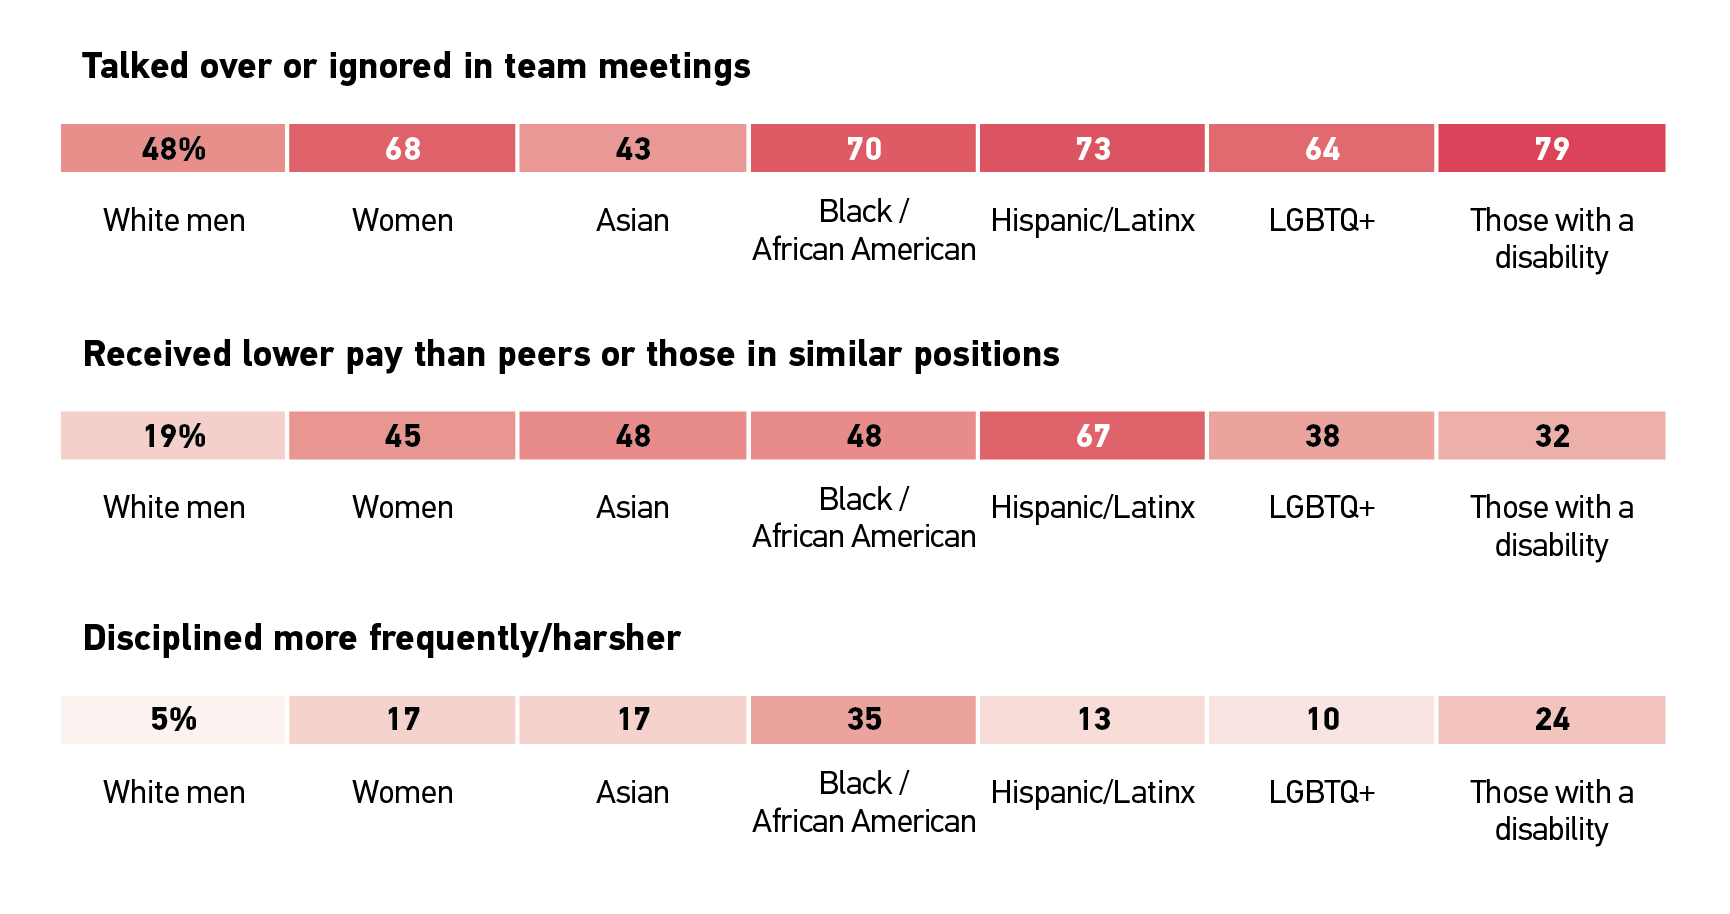 Data chart. The following percentage of respondents by demographic category have been talked over or ignored in team meetings: 48% of white men, 68% of women, 43% of Asian, 70% of Black/African American, 73% of Hispanic/Latinx, 64% of LGBTQ+, and 79% of those with a disability. The following percentage of respondents by demographic category have received lower pay than peers or those in similar positions: 19% of white men, 45% of women, 48% of Asian, 48% of Black/African American, 67% of Hispanic/Latinx, 38% of LGBTQ+, and 32% of those with a disability. The following percentage of respondents by demographic category have been disciplined more frequently/harsher: 5% of white men, 17% of women, 17% of Asian, 35% of Black/African American, 13% of Hispanic/Latinx, 10% of LGBTQ+, and 24% of those with a disability. 